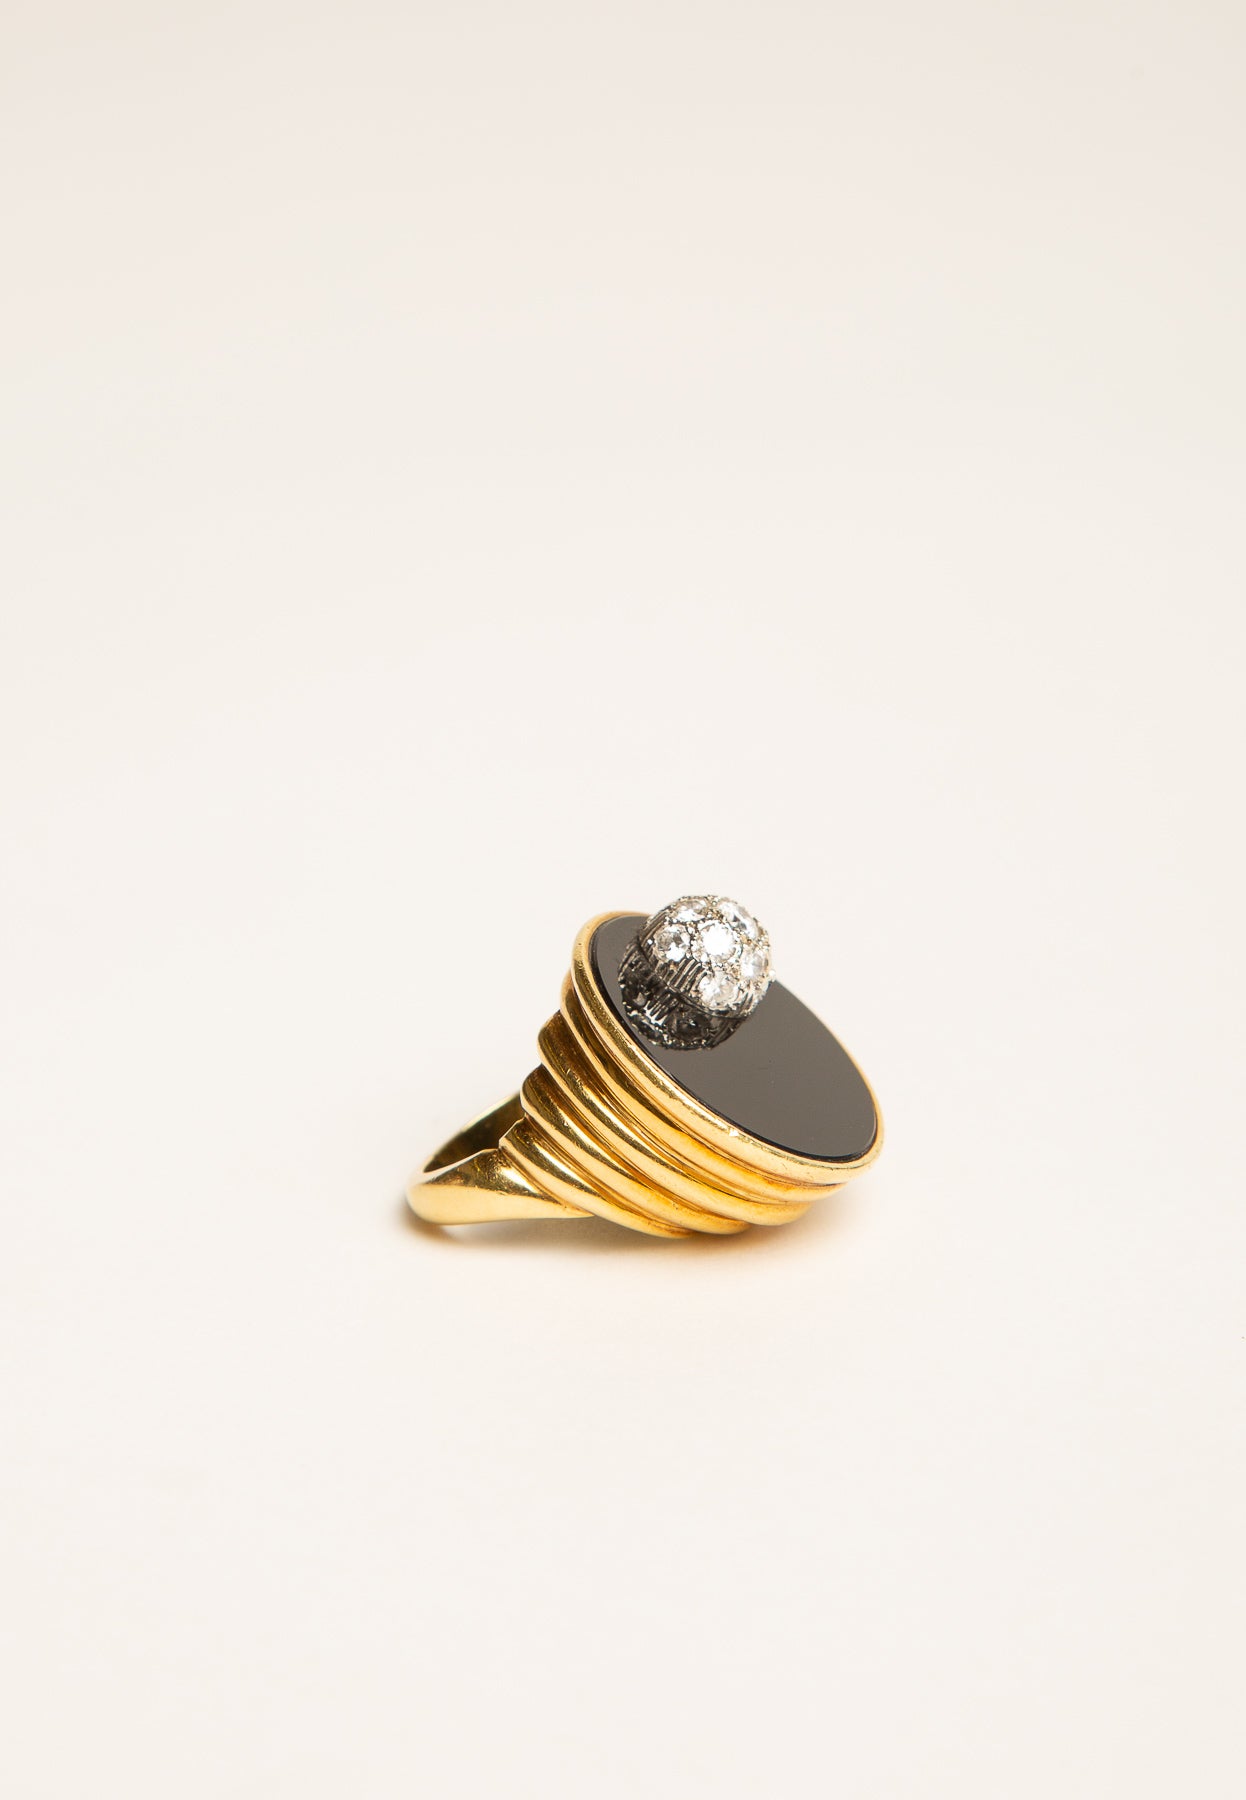 MAXFIELD PRIVATE COLLECTION | 1970'S MODERNIST ONYX RING